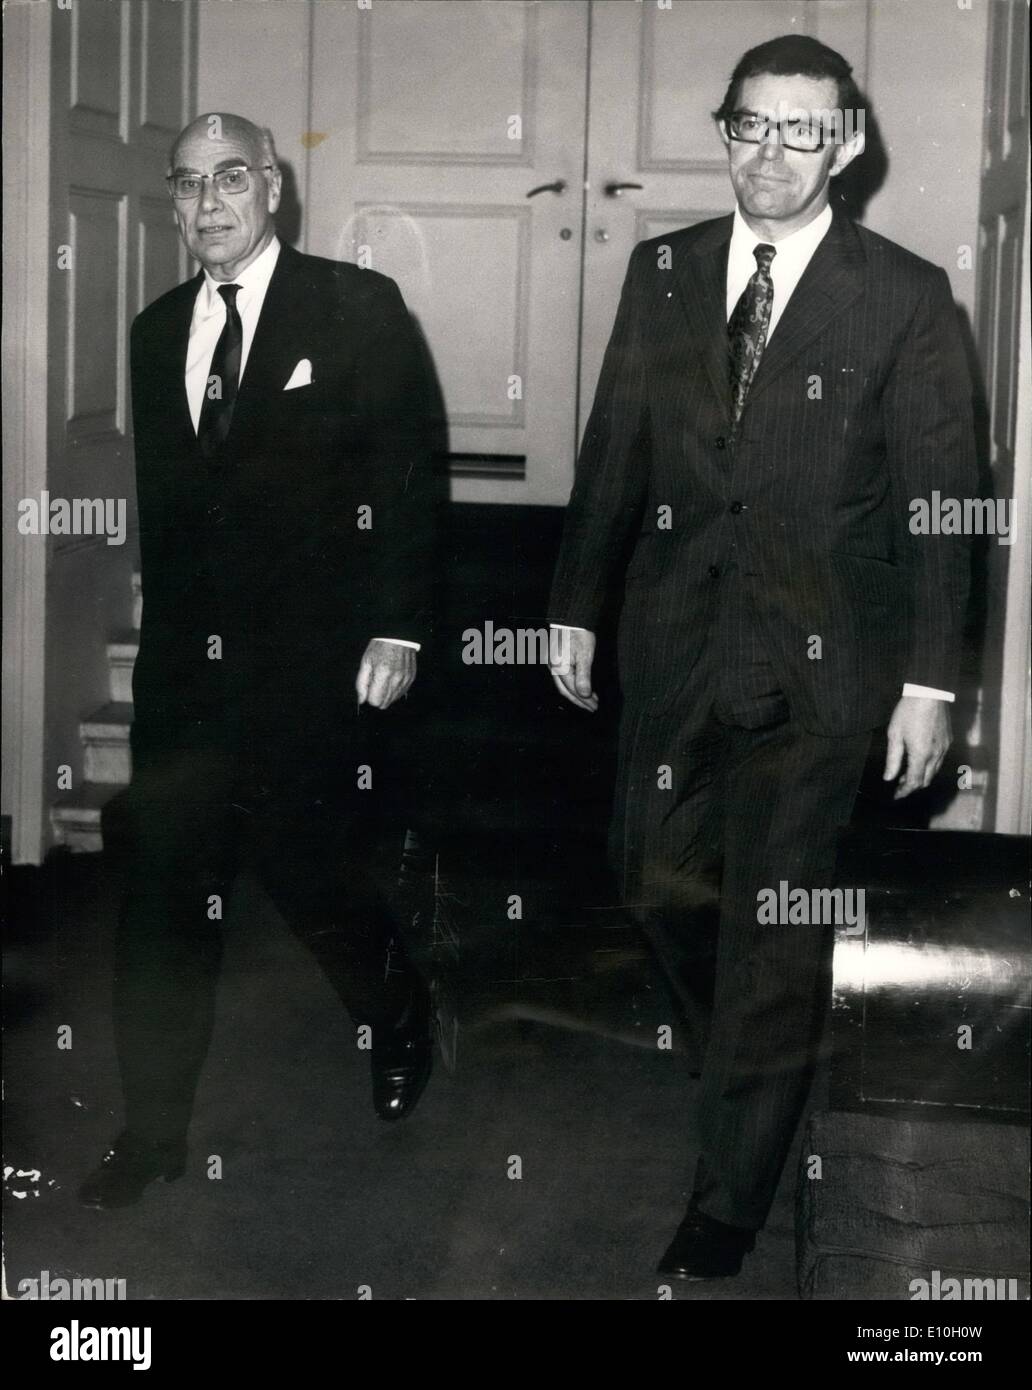 Feb. 02, 1973 - Lord Stokes at British Leyland Luncheon; Photo Shows Lord Stokes (left) arriving for today's British Layland luncheon at the Savoy, with George Turnbull, one of deputes. Stock Photo